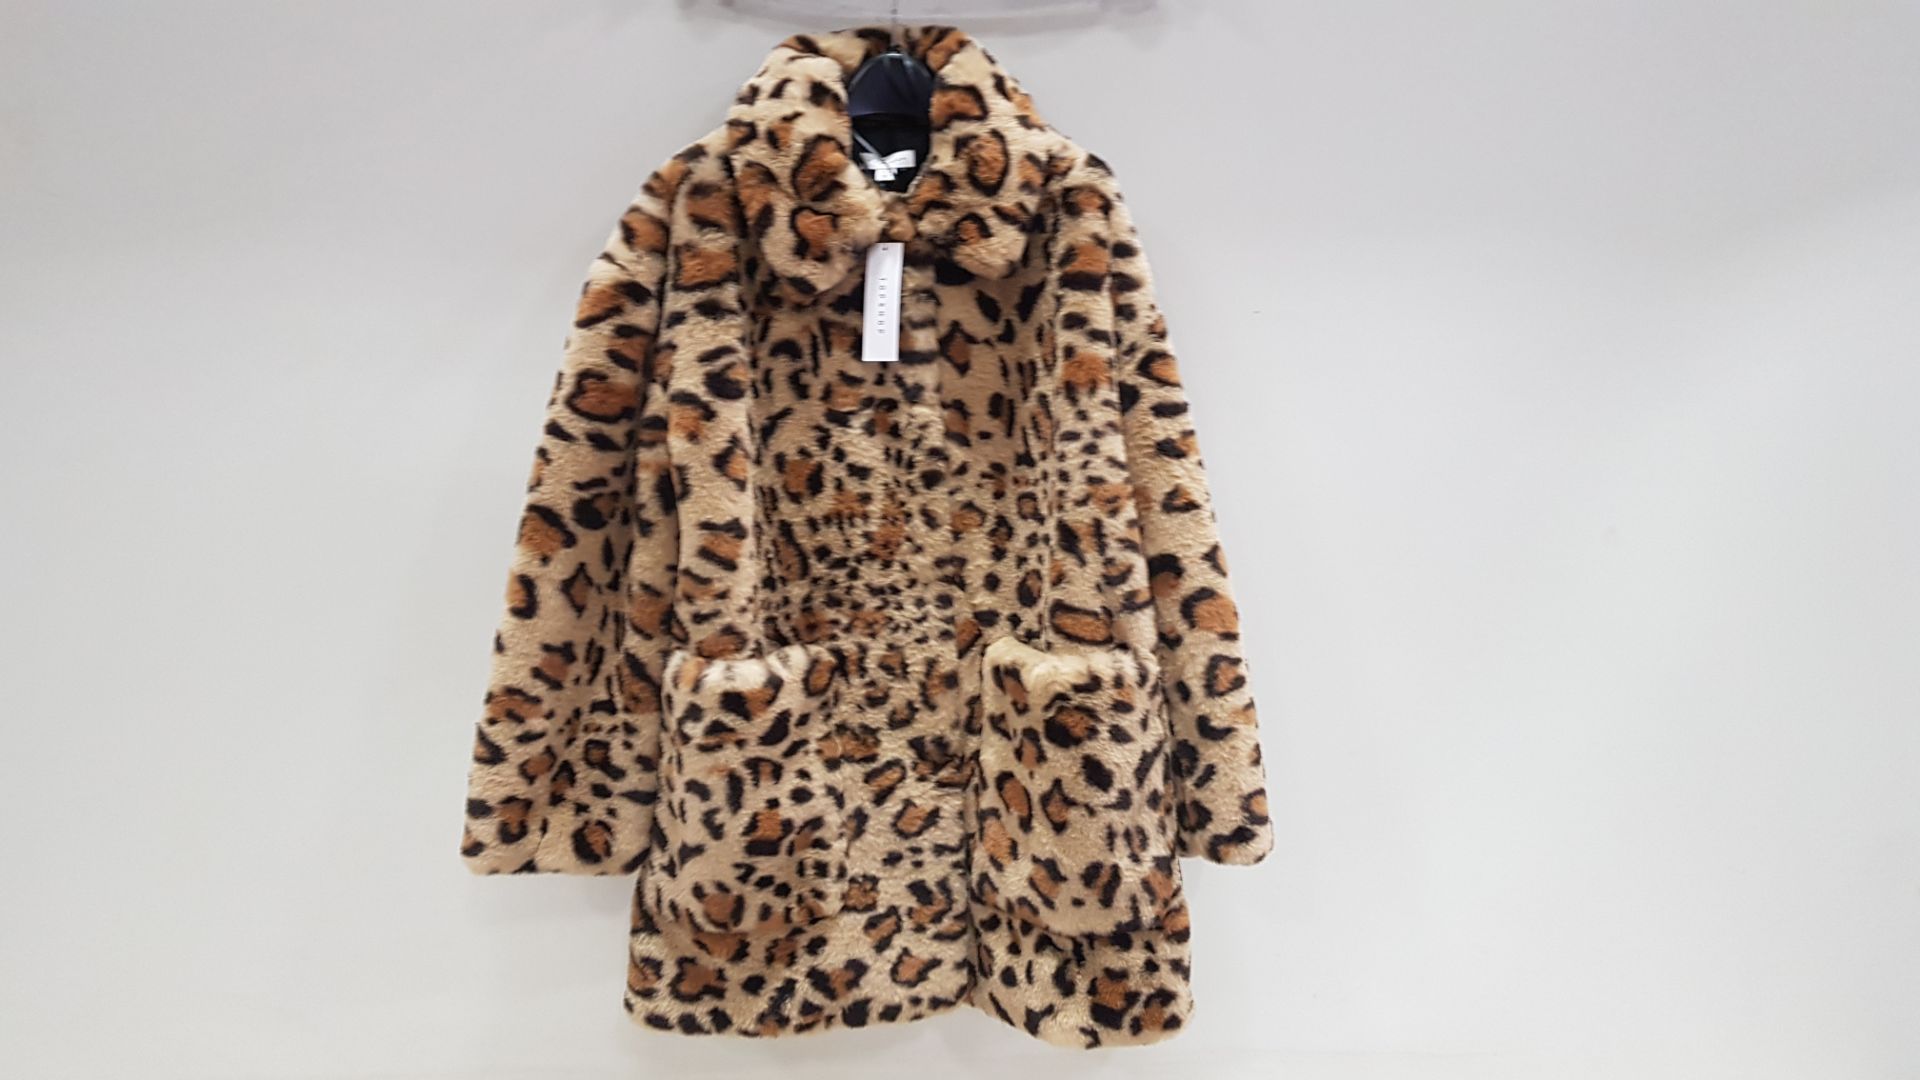 11 X BRAND NEW TOPSHOP LEOPARD STYLED FAUX FUR JACKETS IN VARIOUS SIZES